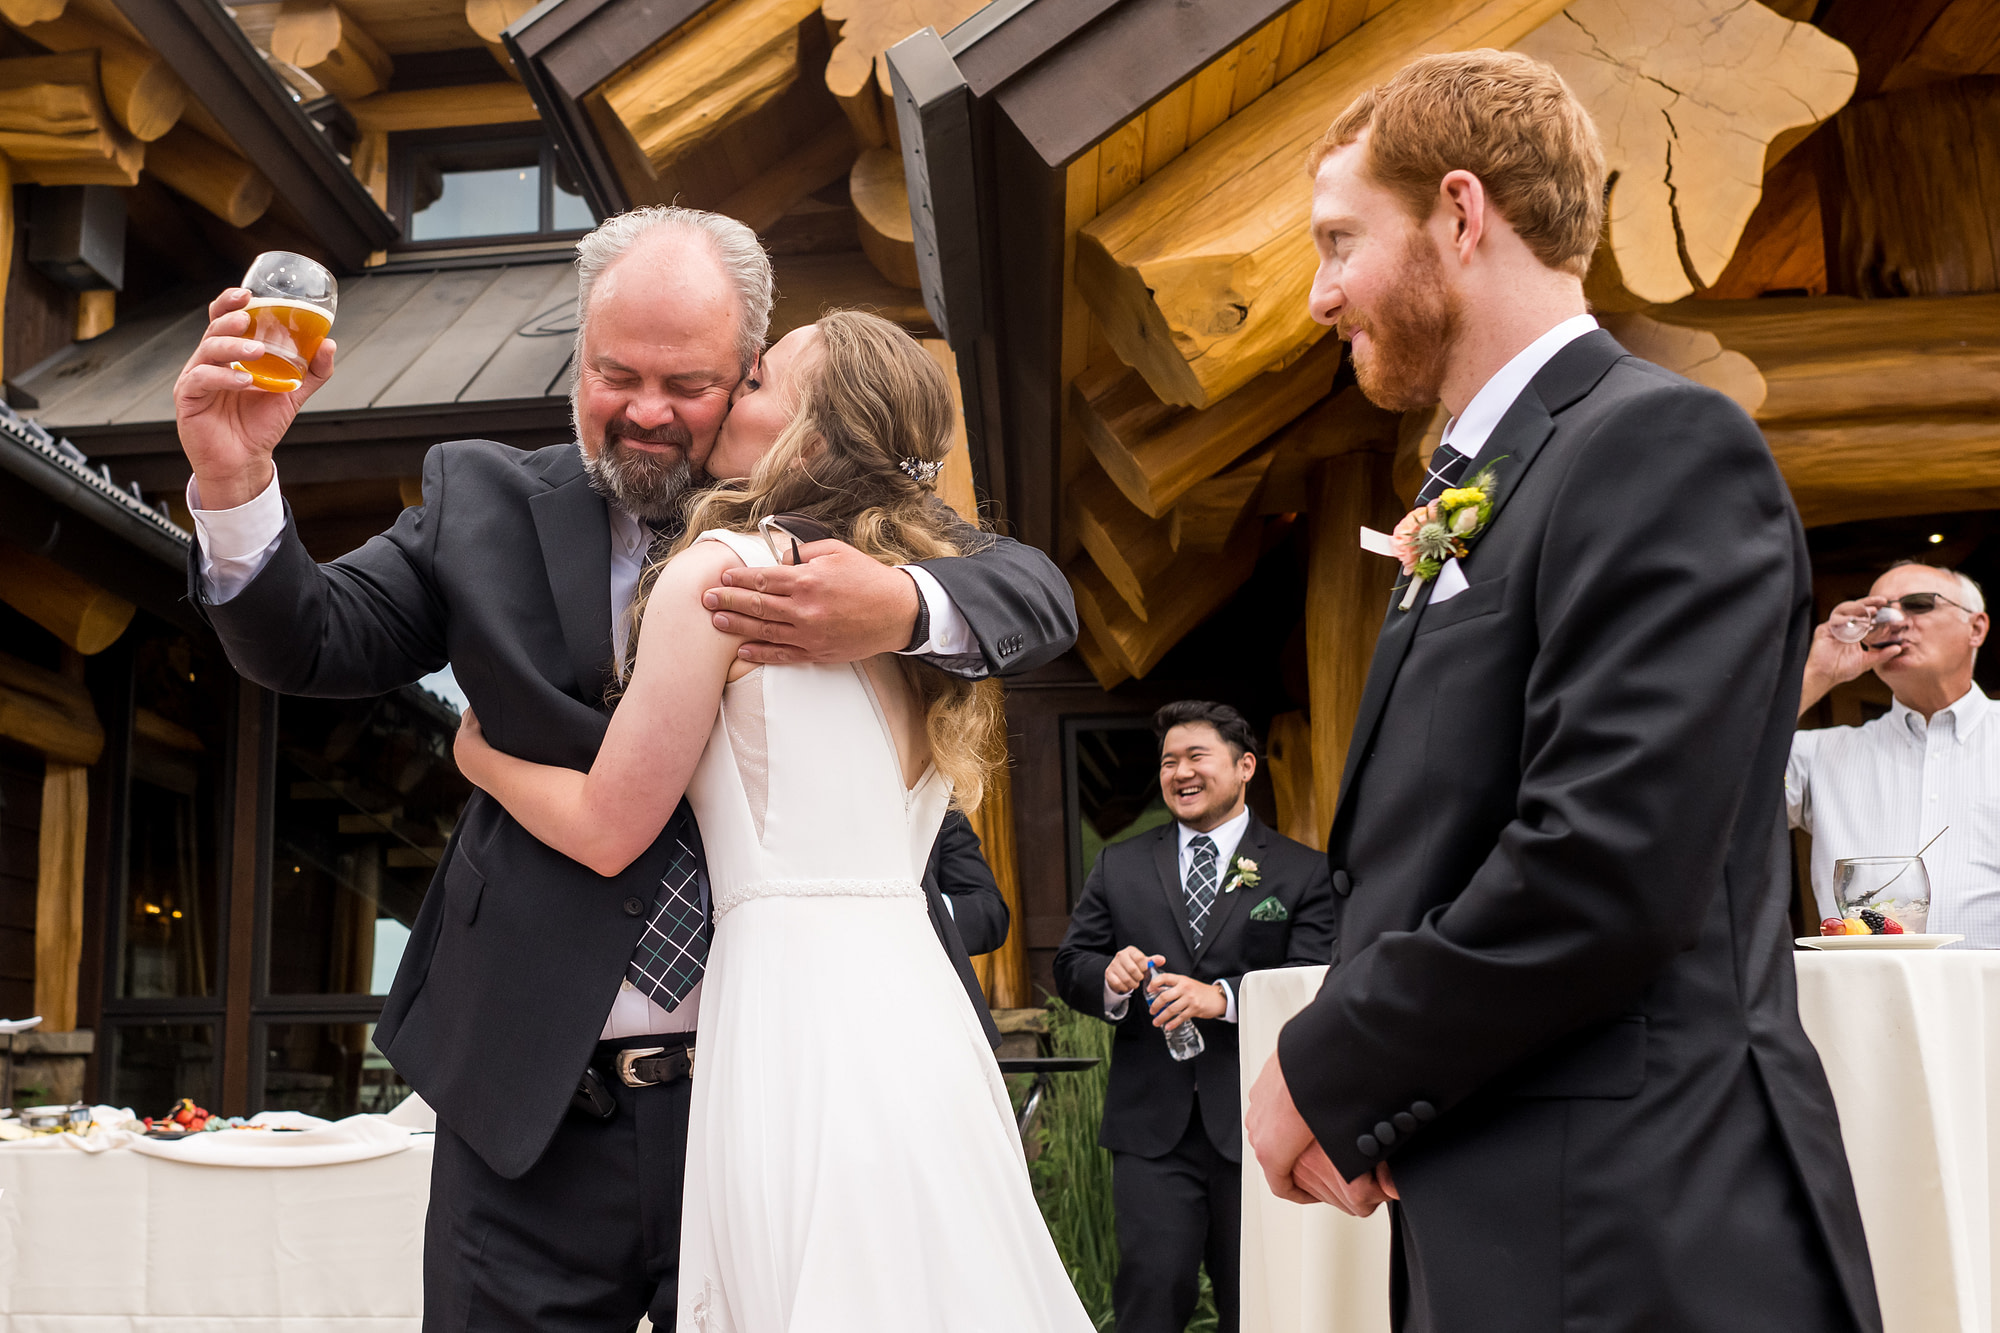 The bride kisses her father after a toast as the groom looks on during their wedding in Telluride, Colorado.